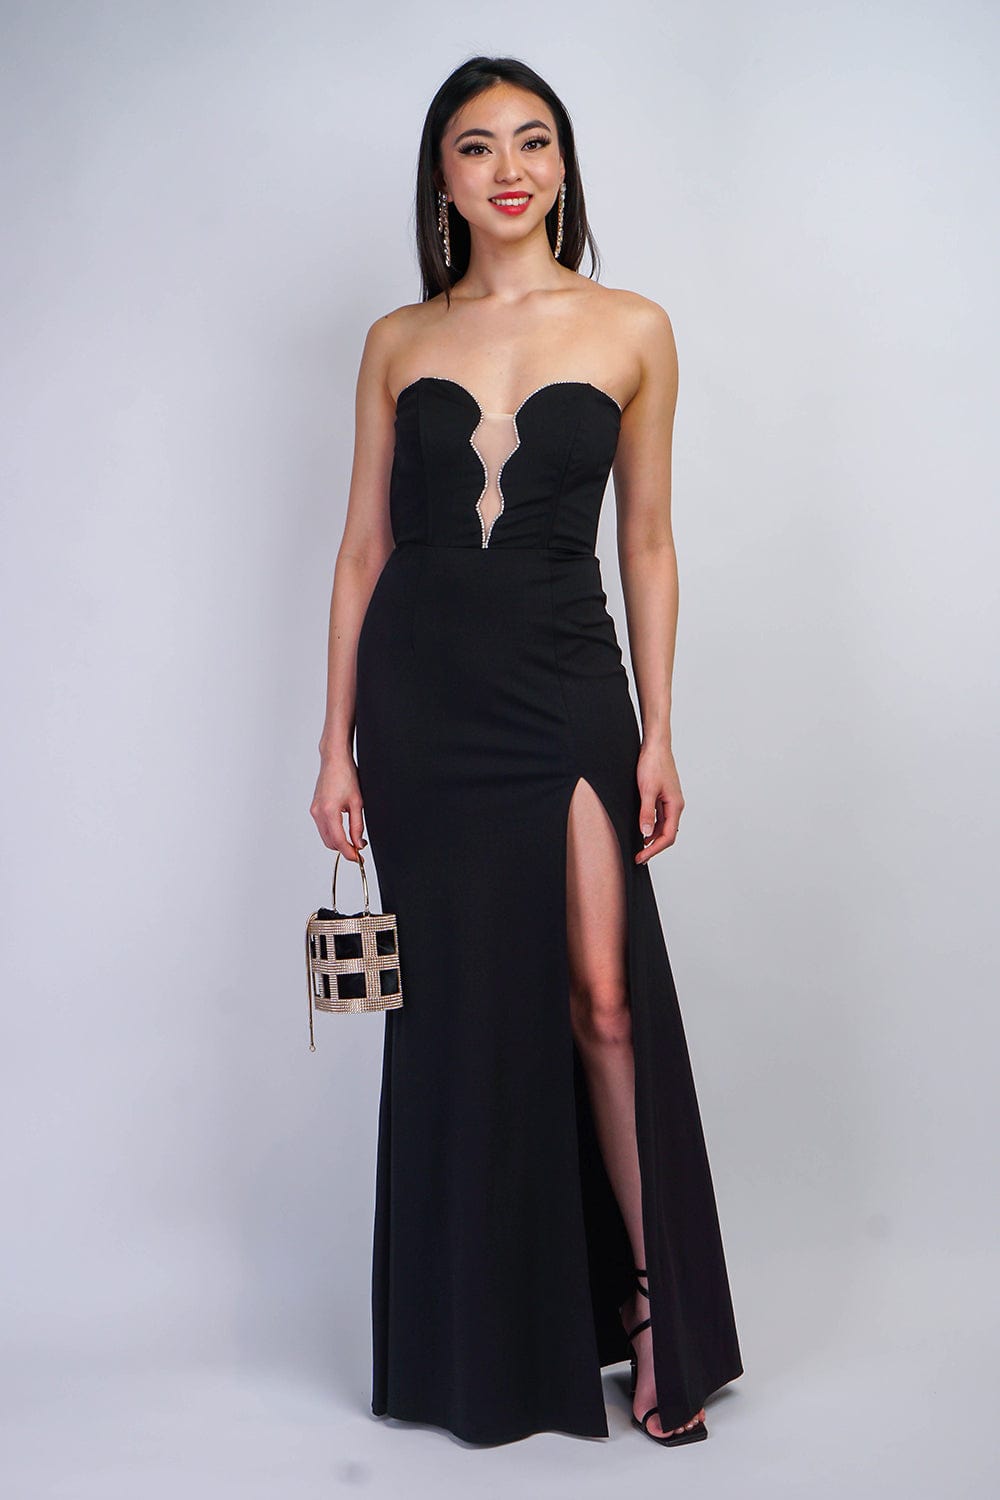 DCD GOWNS Black Strapless Bejewel Necklace Gown